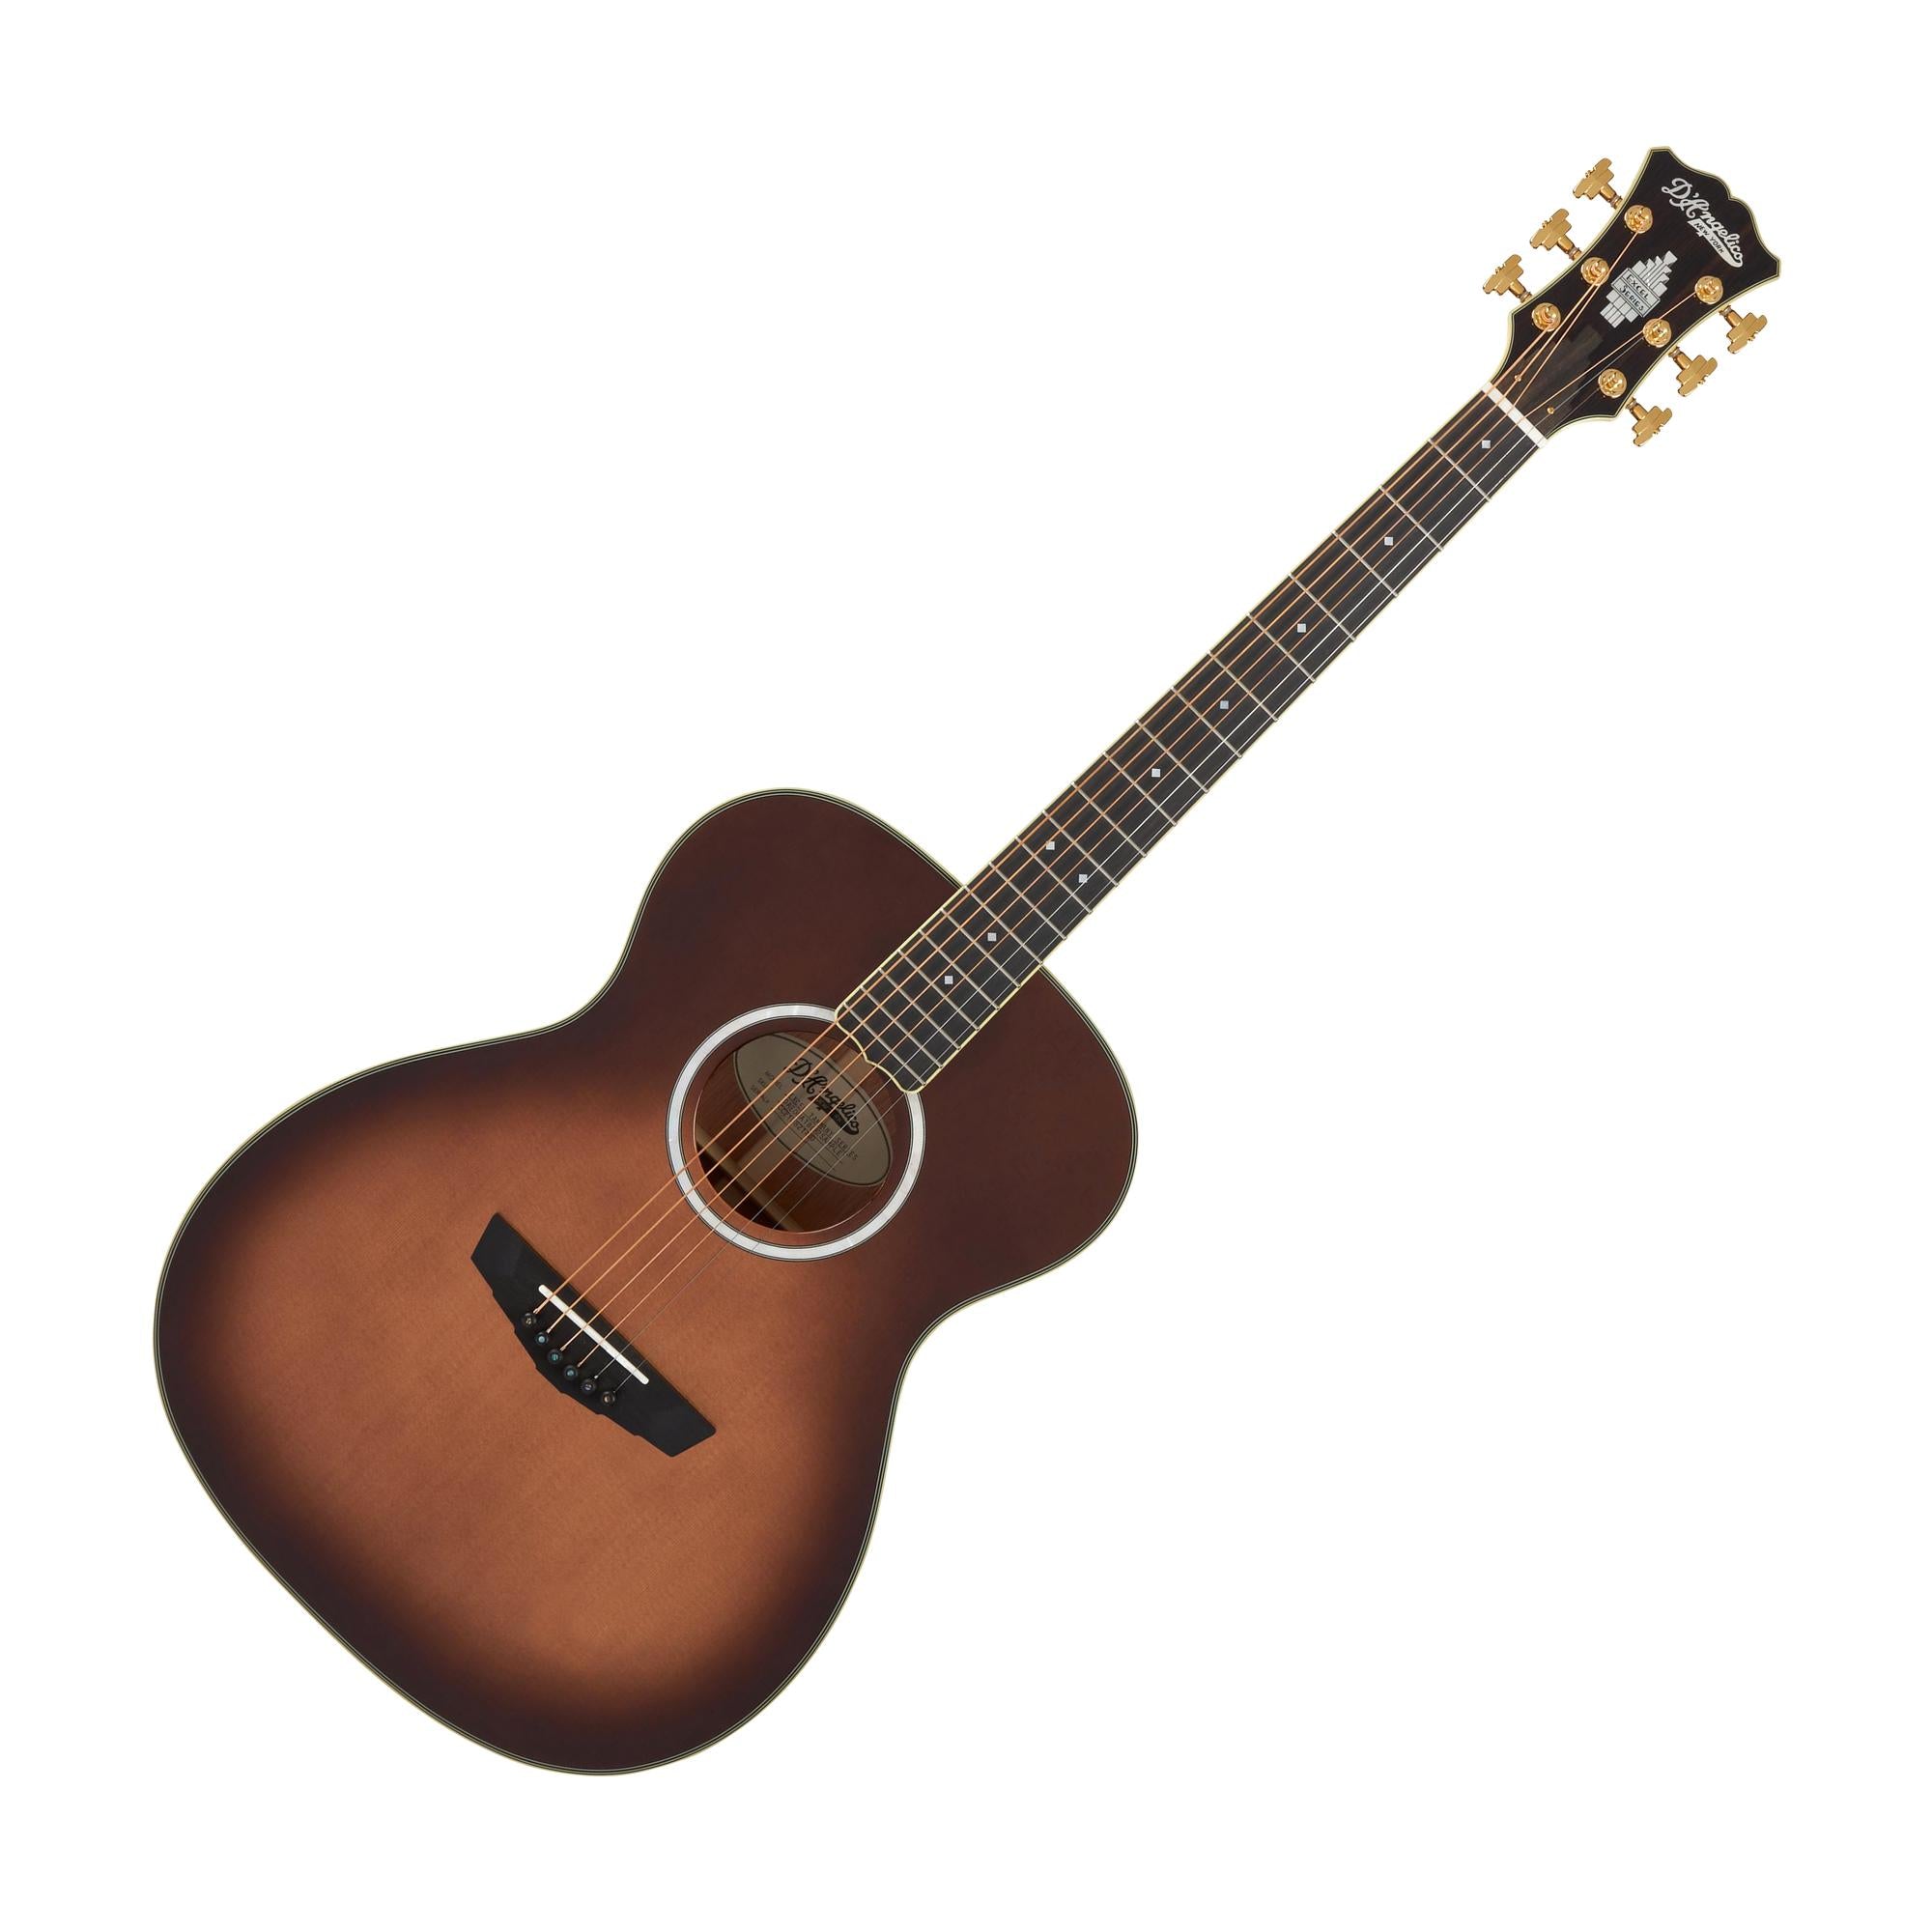 D'Angelico DAEOMATBGP2 Excel Tammany Series Acoustic Electric Guitar, Autumn Burst